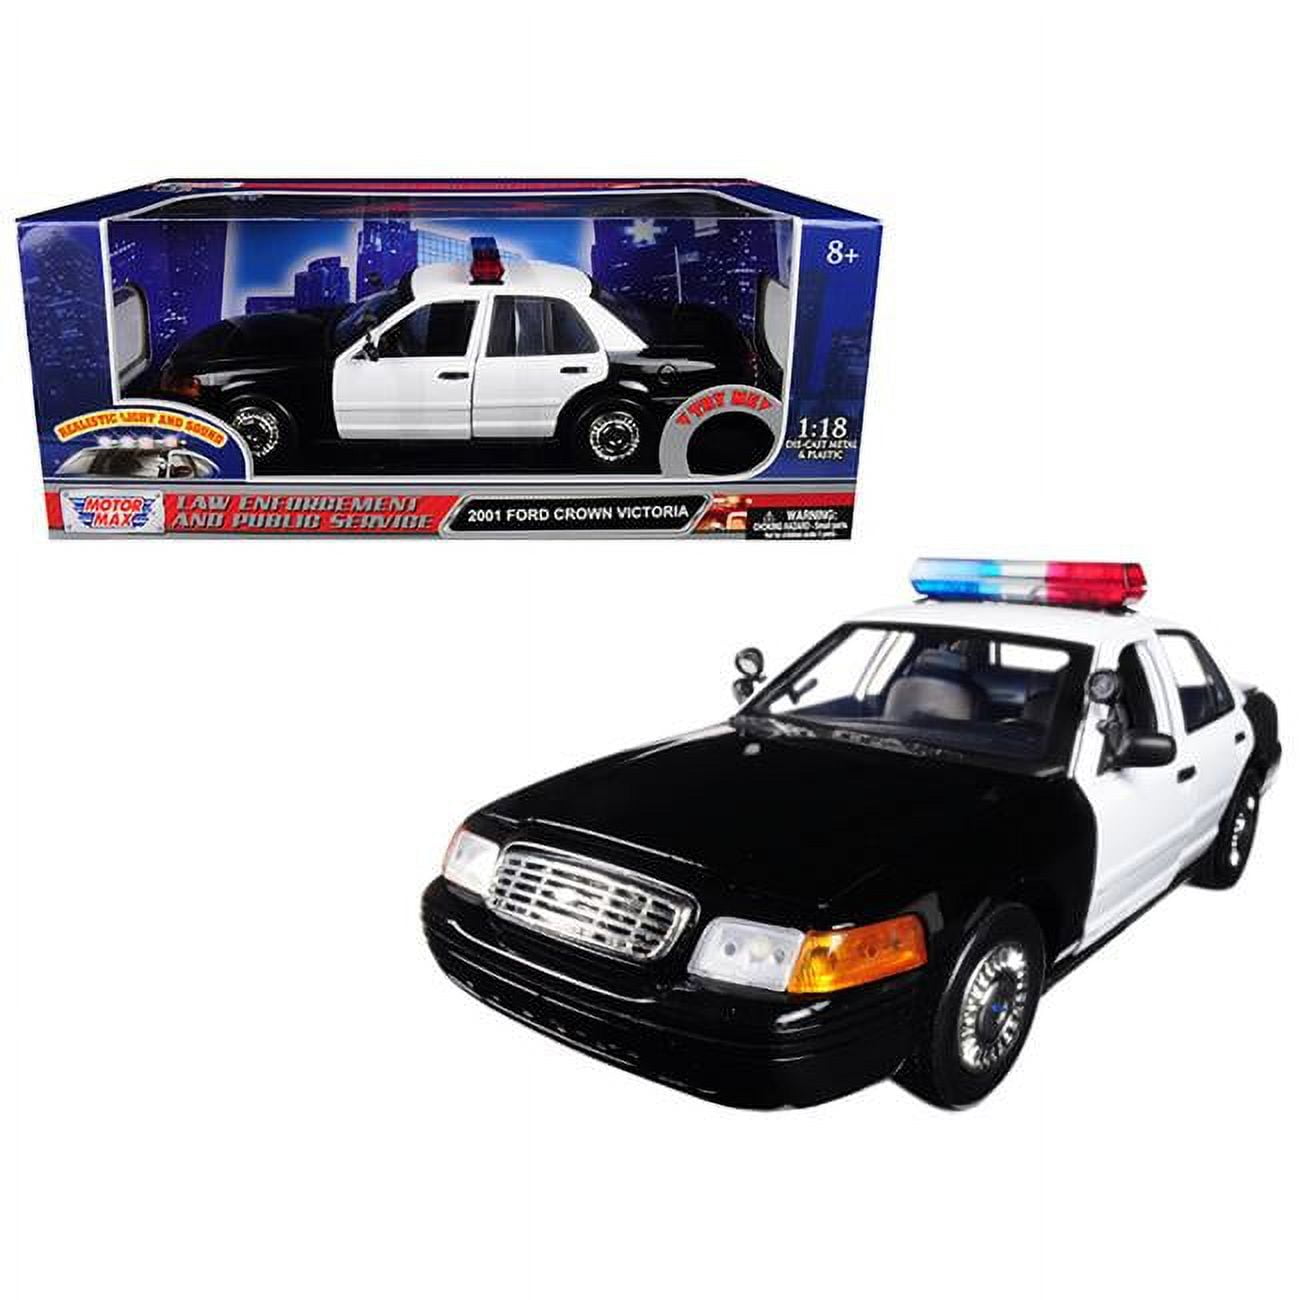 73991 1-18 2001 Ford Crown Victoria Police Diecast Model Car with Front & Rear Lights & Sound - Black, White -  Motormax Toy